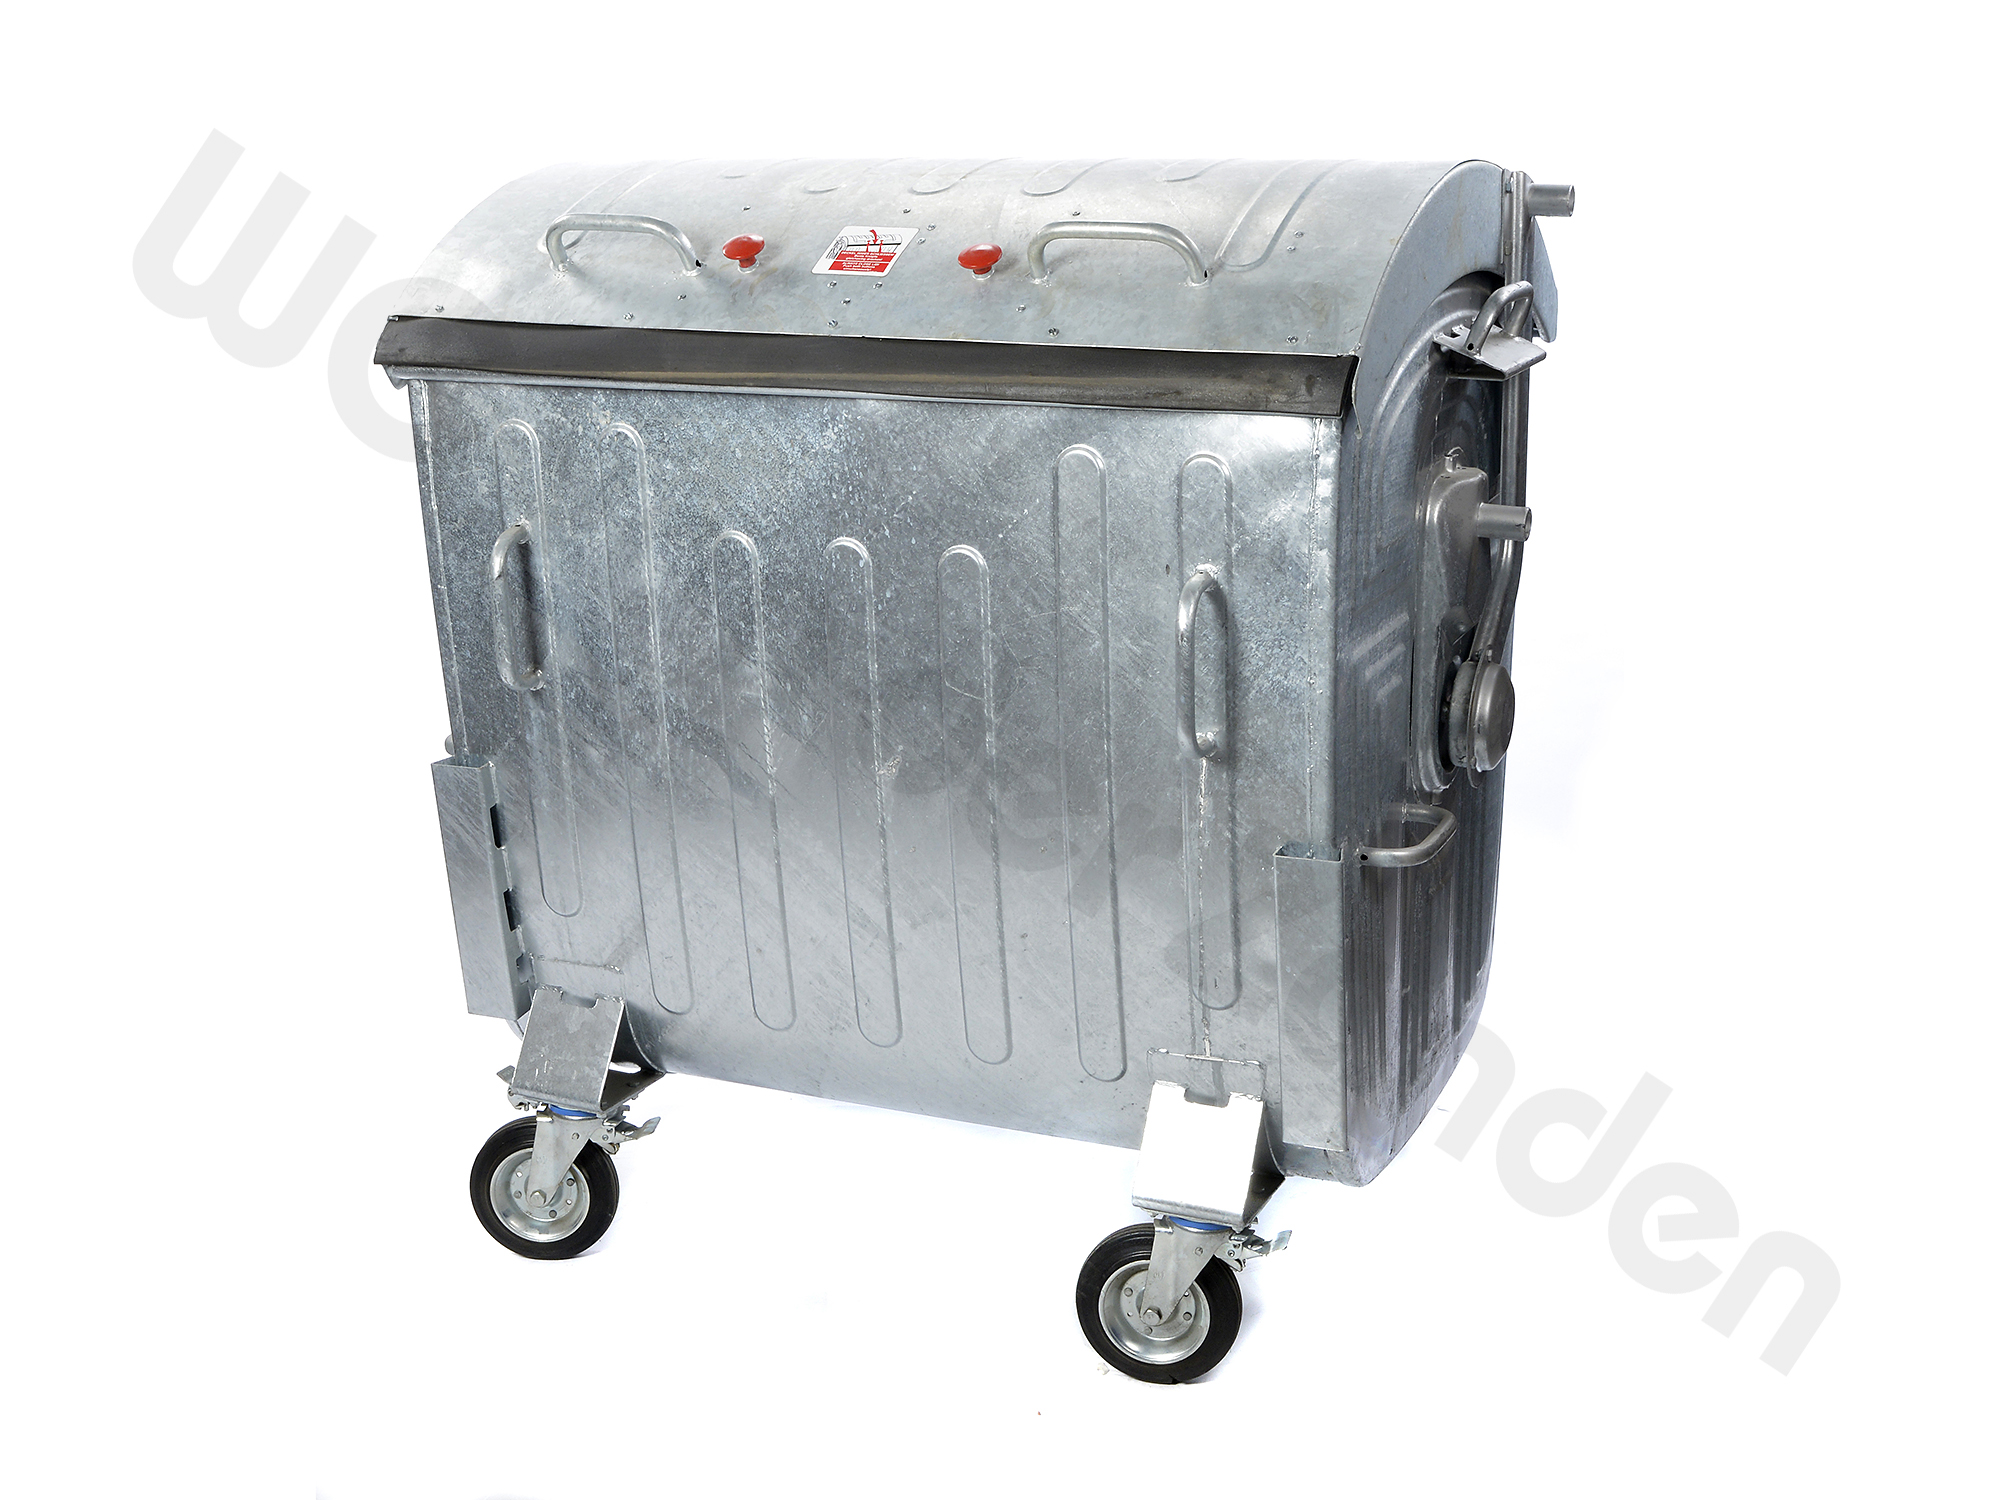 440457 GARBAGE CONTAINER 1100 LTR GALV. STEEL DOME LID WHEELED